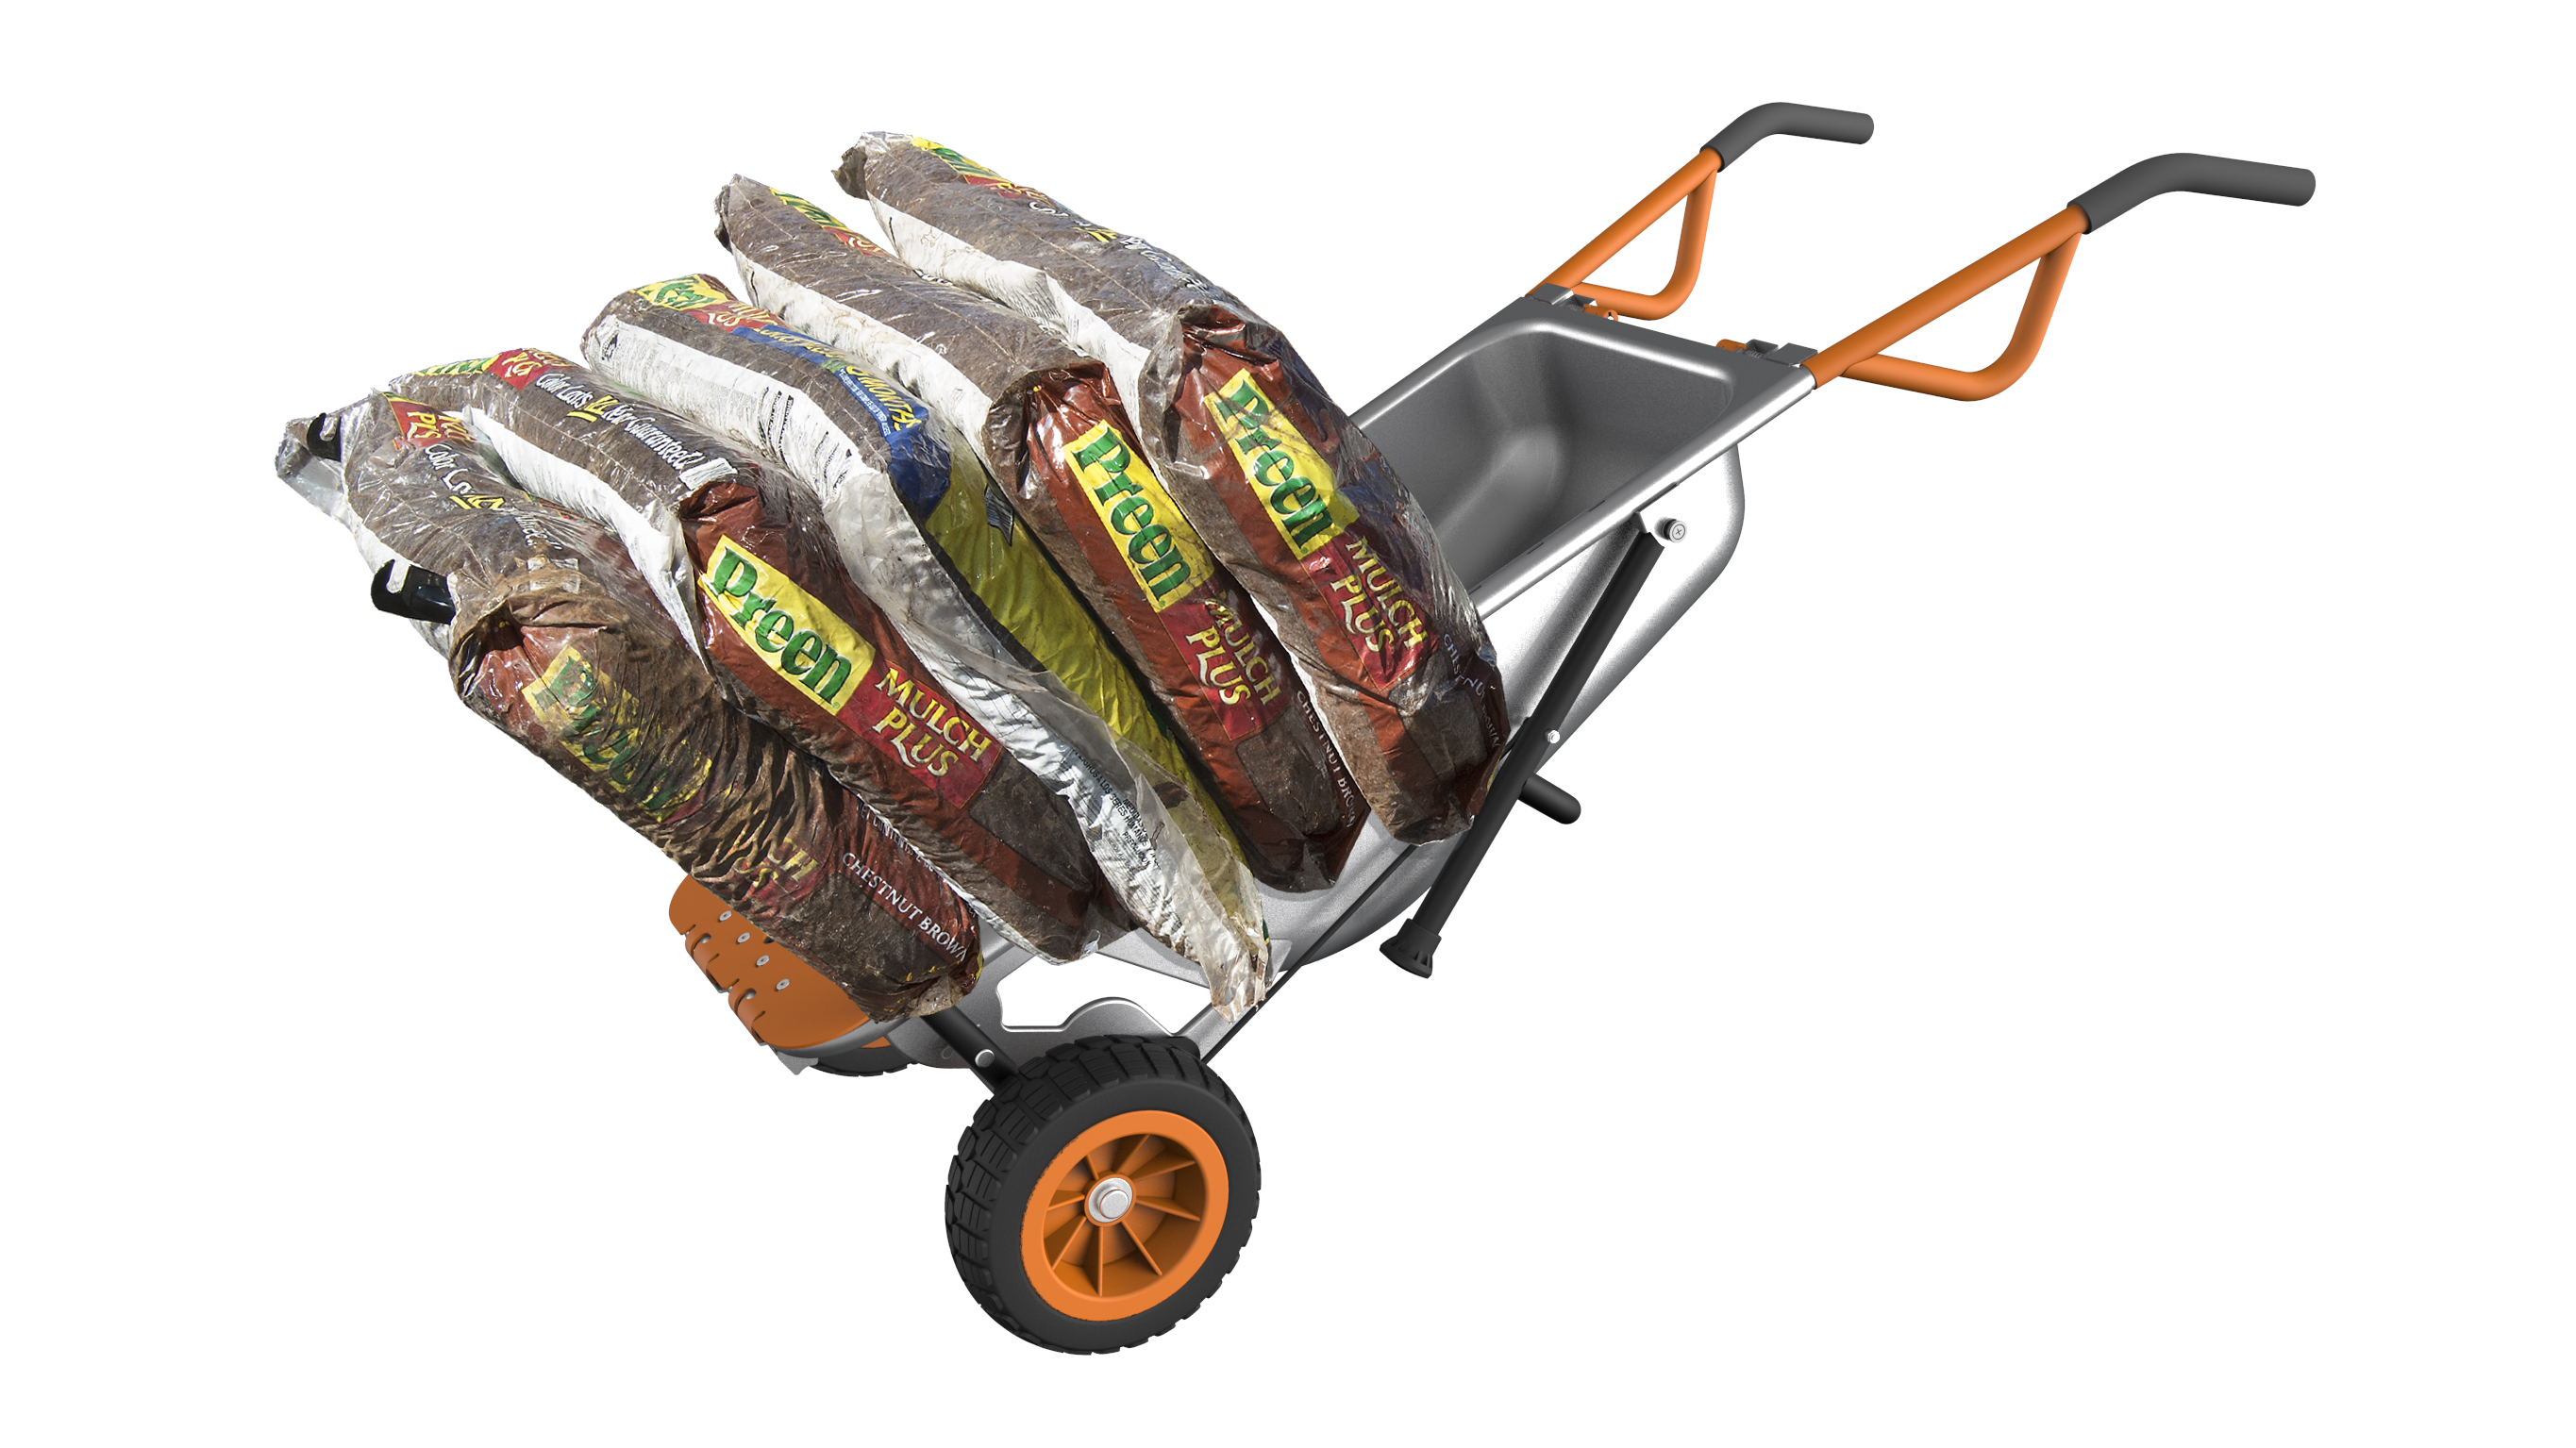 WORX AeroCart is equipped with drop-down extension arms, which help move bags of mulch and fertilizer.